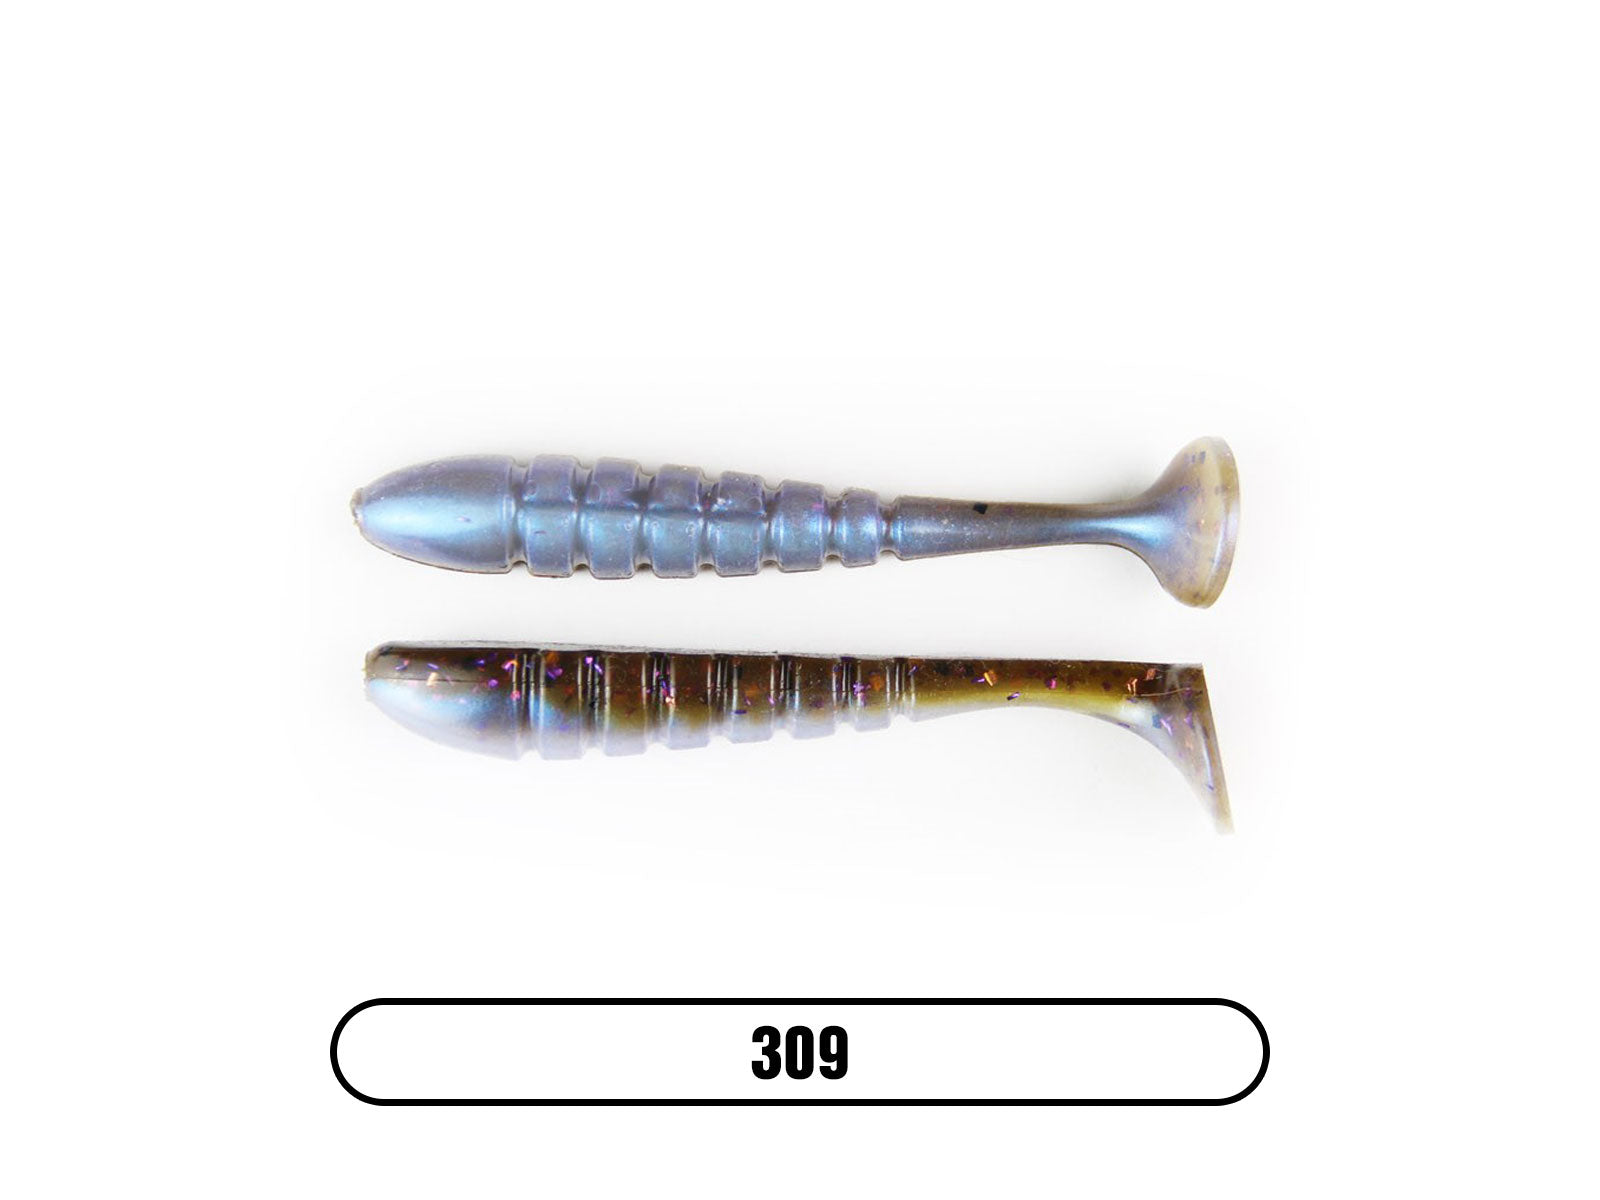 Pro Series Swammer 4 (6 Pack) – X Zone Lures Canada